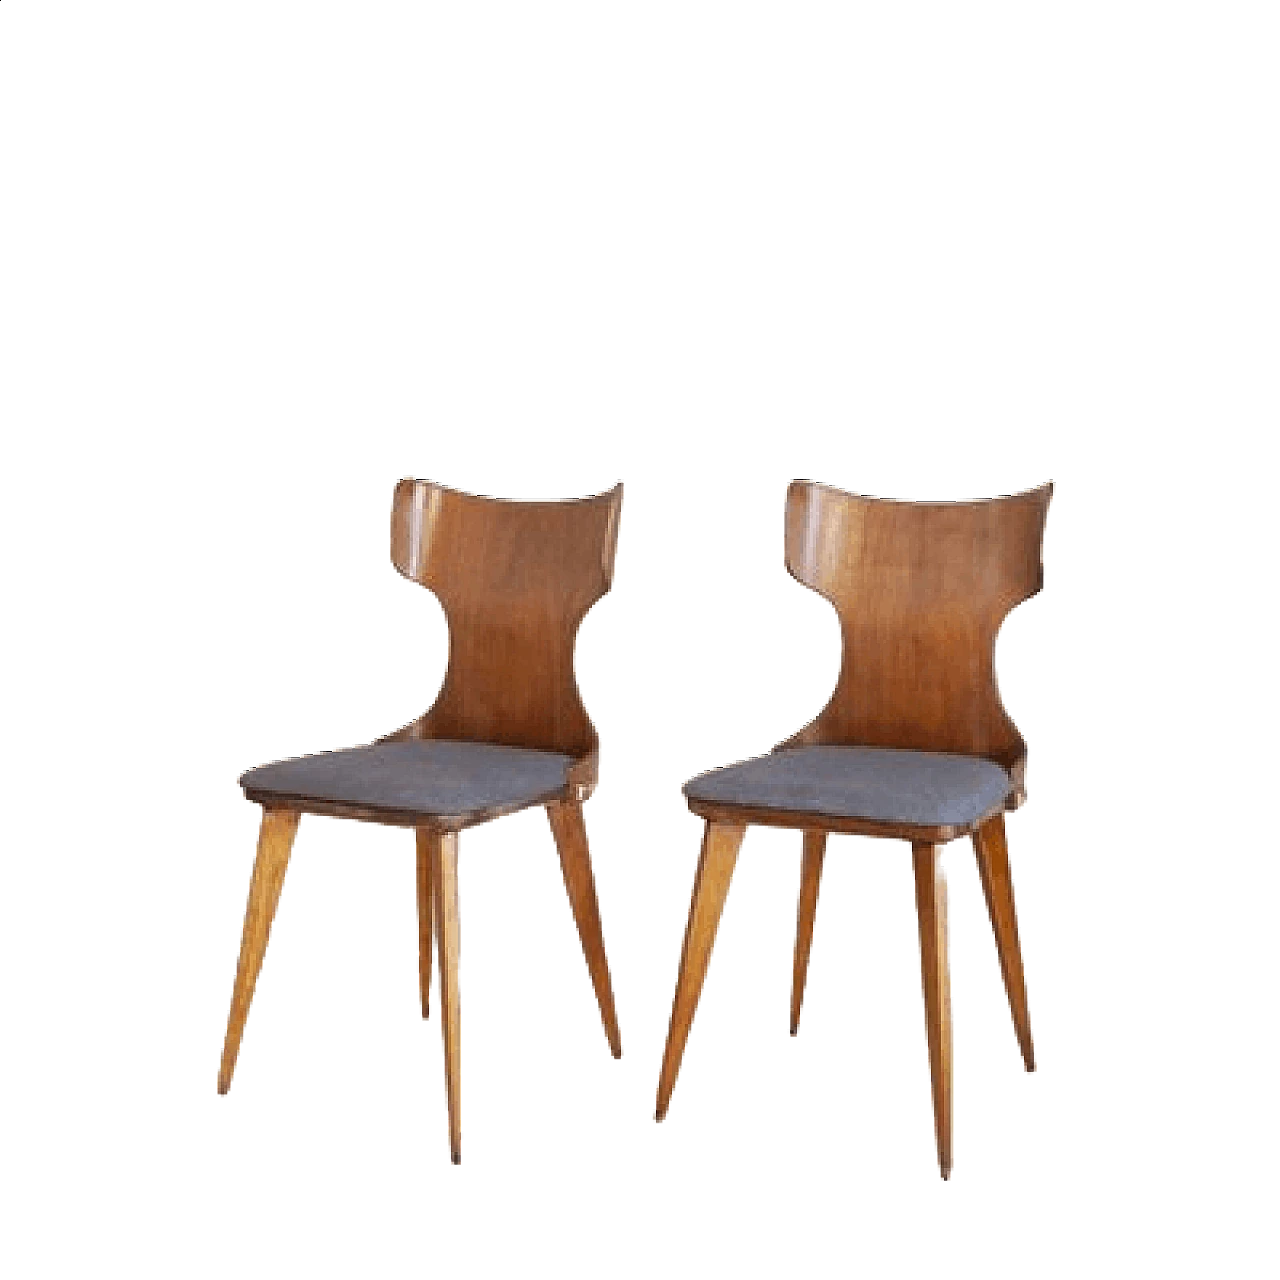 Pair of Curved Wooden Chairs by Carlo Ratti, 1950s 7